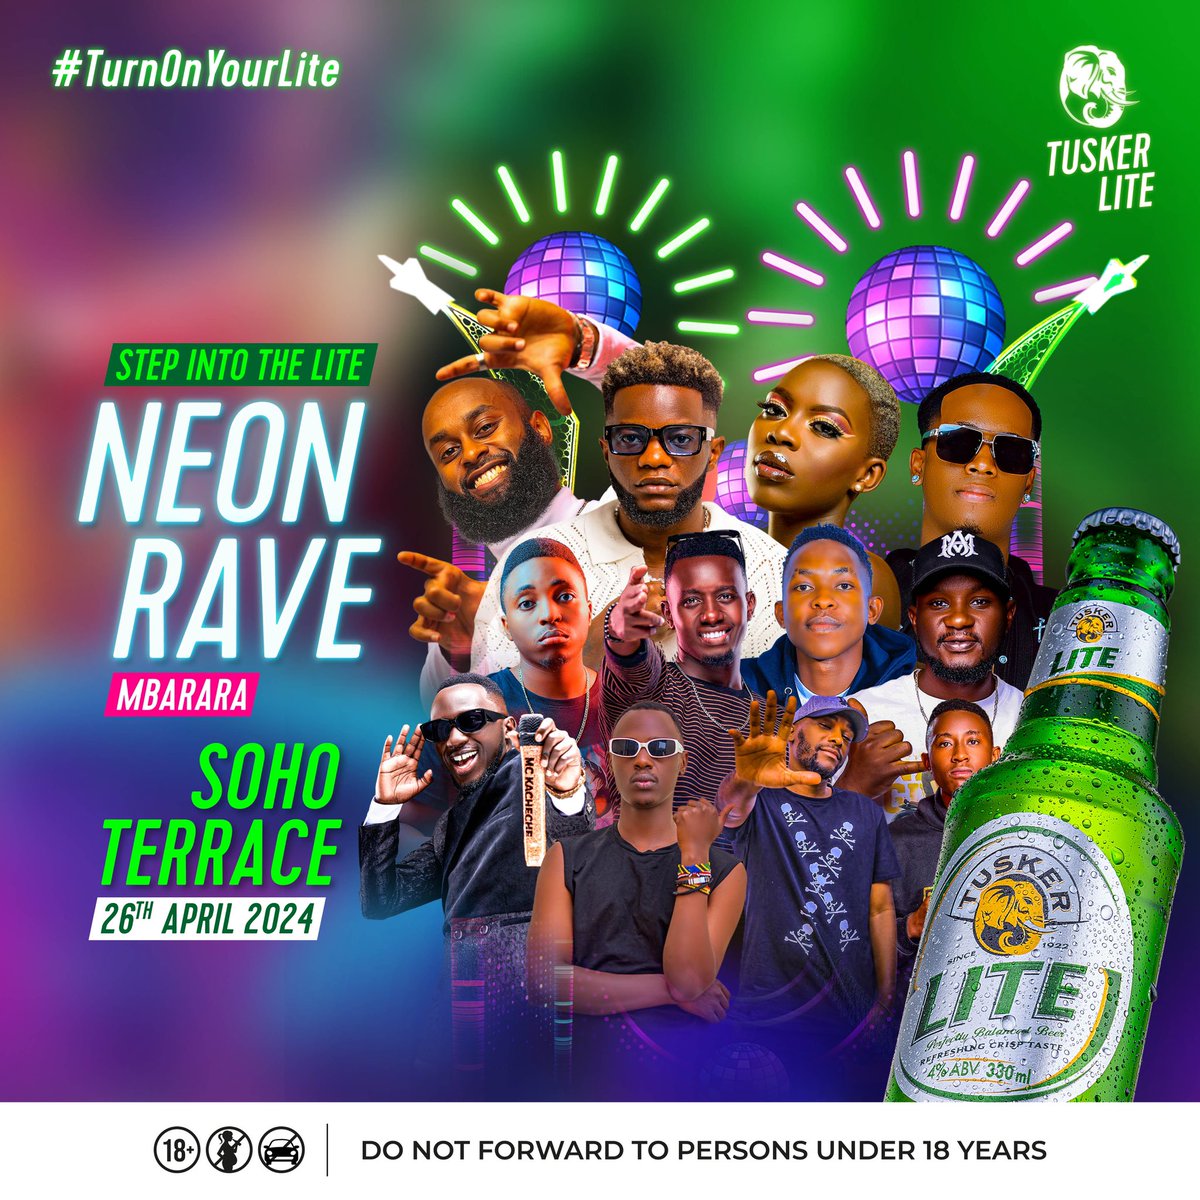 Lights, beats, big line up and a touch of magical vibrations 🔥next #SoHoFridays 26th April #TurnOnYourLite #NeonRaveMbarara Edition at SoHo Terrace